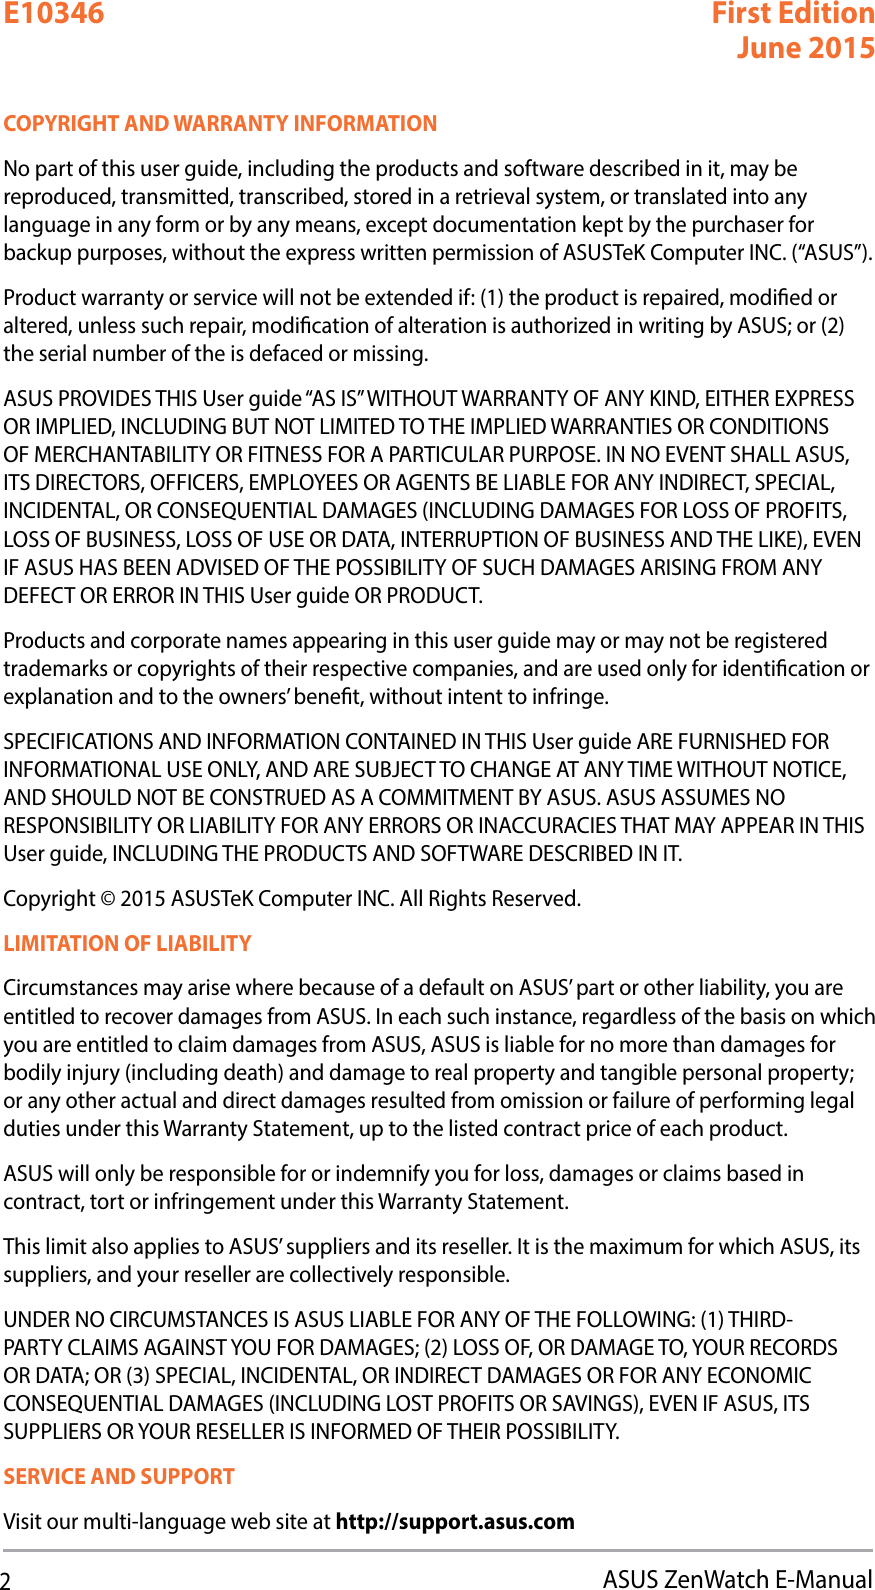 2ASUS ZenWatch E-ManualCOPYRIGHT AND WARRANTY INFORMATIONNo part of this user guide, including the products and software described in it, may be reproduced, transmitted, transcribed, stored in a retrieval system, or translated into any language in any form or by any means, except documentation kept by the purchaser for backup purposes, without the express written permission of ASUSTeK Computer INC. (“ASUS”).Product warranty or service will not be extended if: (1) the product is repaired, modied or altered, unless such repair, modication of alteration is authorized in writing by ASUS; or (2) the serial number of the is defaced or missing.ASUS PROVIDES THIS User guide “AS IS” WITHOUT WARRANTY OF ANY KIND, EITHER EXPRESS OR IMPLIED, INCLUDING BUT NOT LIMITED TO THE IMPLIED WARRANTIES OR CONDITIONS OF MERCHANTABILITY OR FITNESS FOR A PARTICULAR PURPOSE. IN NO EVENT SHALL ASUS, ITS DIRECTORS, OFFICERS, EMPLOYEES OR AGENTS BE LIABLE FOR ANY INDIRECT, SPECIAL, INCIDENTAL, OR CONSEQUENTIAL DAMAGES (INCLUDING DAMAGES FOR LOSS OF PROFITS, LOSS OF BUSINESS, LOSS OF USE OR DATA, INTERRUPTION OF BUSINESS AND THE LIKE), EVEN IF ASUS HAS BEEN ADVISED OF THE POSSIBILITY OF SUCH DAMAGES ARISING FROM ANY DEFECT OR ERROR IN THIS User guide OR PRODUCT.Products and corporate names appearing in this user guide may or may not be registered trademarks or copyrights of their respective companies, and are used only for identication or explanation and to the owners’ benet, without intent to infringe.SPECIFICATIONS AND INFORMATION CONTAINED IN THIS User guide ARE FURNISHED FOR INFORMATIONAL USE ONLY, AND ARE SUBJECT TO CHANGE AT ANY TIME WITHOUT NOTICE, AND SHOULD NOT BE CONSTRUED AS A COMMITMENT BY ASUS. ASUS ASSUMES NO RESPONSIBILITY OR LIABILITY FOR ANY ERRORS OR INACCURACIES THAT MAY APPEAR IN THIS User guide, INCLUDING THE PRODUCTS AND SOFTWARE DESCRIBED IN IT.Copyright © 2015 ASUSTeK Computer INC. All Rights Reserved.LIMITATION OF LIABILITYCircumstances may arise where because of a default on ASUS’ part or other liability, you are entitled to recover damages from ASUS. In each such instance, regardless of the basis on which you are entitled to claim damages from ASUS, ASUS is liable for no more than damages for bodily injury (including death) and damage to real property and tangible personal property; or any other actual and direct damages resulted from omission or failure of performing legal duties under this Warranty Statement, up to the listed contract price of each product.ASUS will only be responsible for or indemnify you for loss, damages or claims based in contract, tort or infringement under this Warranty Statement.This limit also applies to ASUS’ suppliers and its reseller. It is the maximum for which ASUS, its suppliers, and your reseller are collectively responsible.UNDER NO CIRCUMSTANCES IS ASUS LIABLE FOR ANY OF THE FOLLOWING: (1) THIRD-PARTY CLAIMS AGAINST YOU FOR DAMAGES; (2) LOSS OF, OR DAMAGE TO, YOUR RECORDS OR DATA; OR (3) SPECIAL, INCIDENTAL, OR INDIRECT DAMAGES OR FOR ANY ECONOMIC CONSEQUENTIAL DAMAGES (INCLUDING LOST PROFITS OR SAVINGS), EVEN IF ASUS, ITS SUPPLIERS OR YOUR RESELLER IS INFORMED OF THEIR POSSIBILITY.SERVICE AND SUPPORTVisit our multi-language web site at http://support.asus.comE10346 First EditionJune 2015